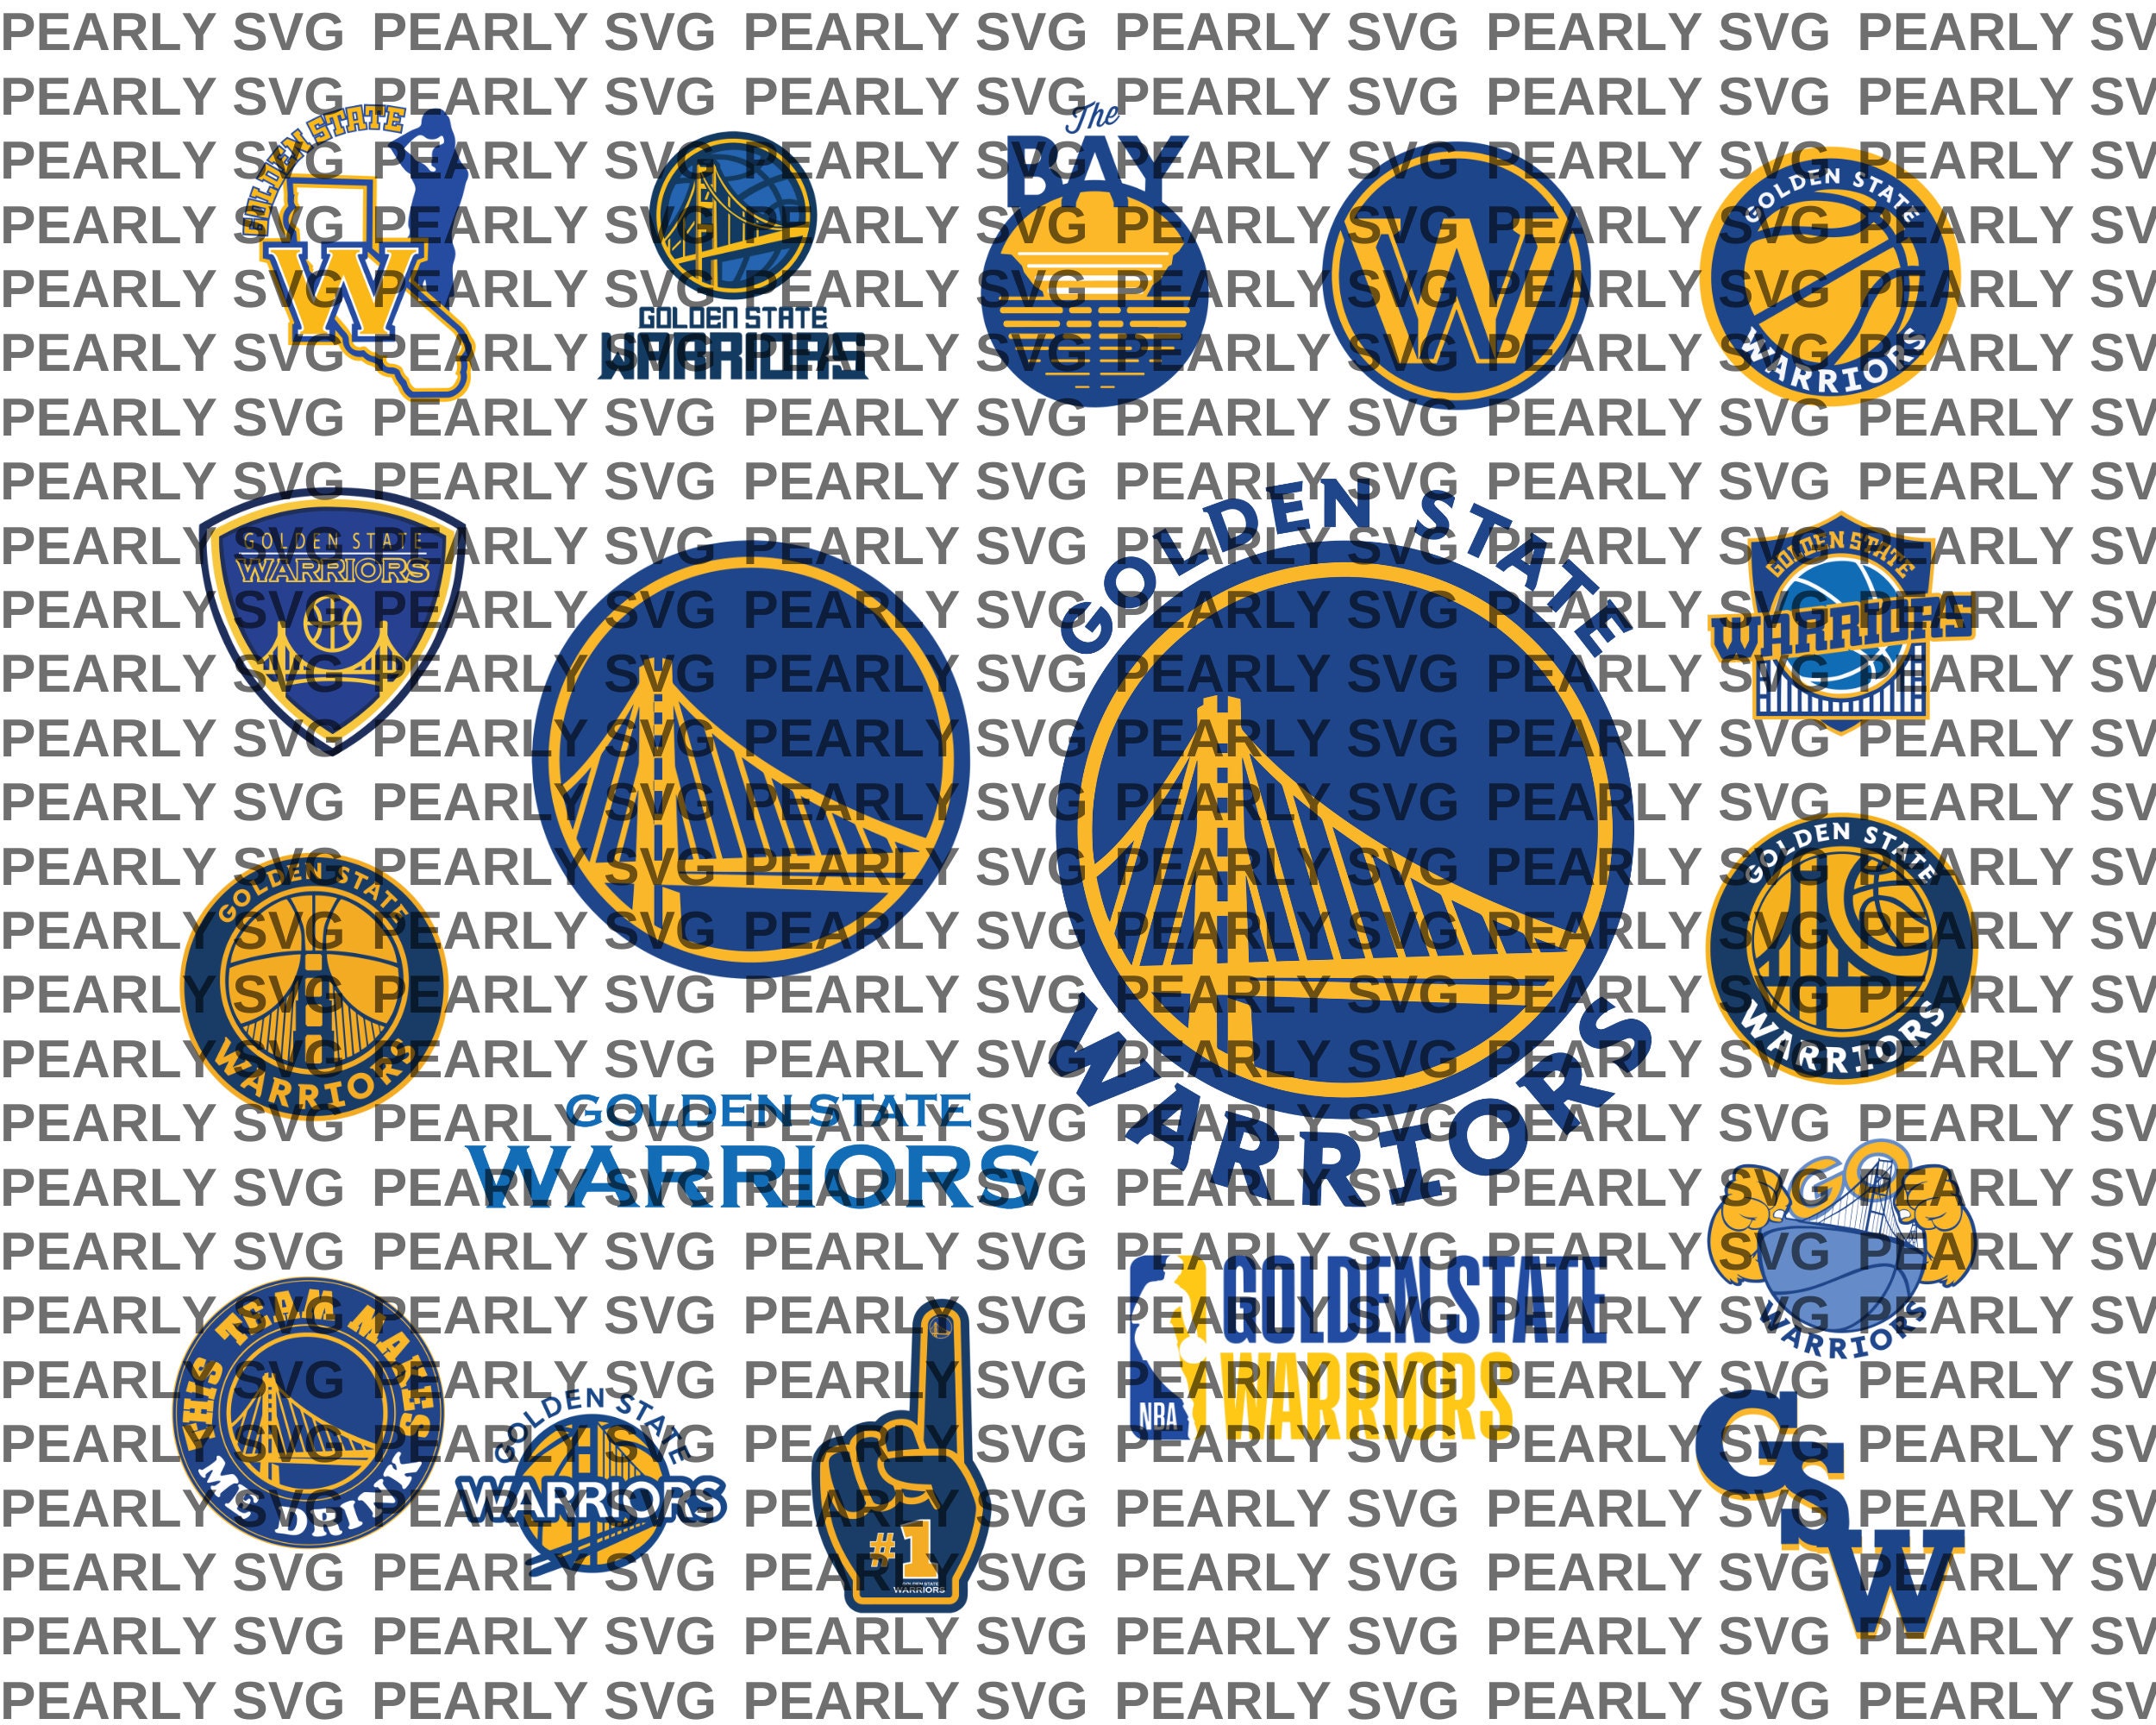  Golden State Warriors Official NBA 4 inch x 4 inch Die Cut Car  Decal by Wincraft, Model: , Spoorting Goods Shop : Sports & Outdoors